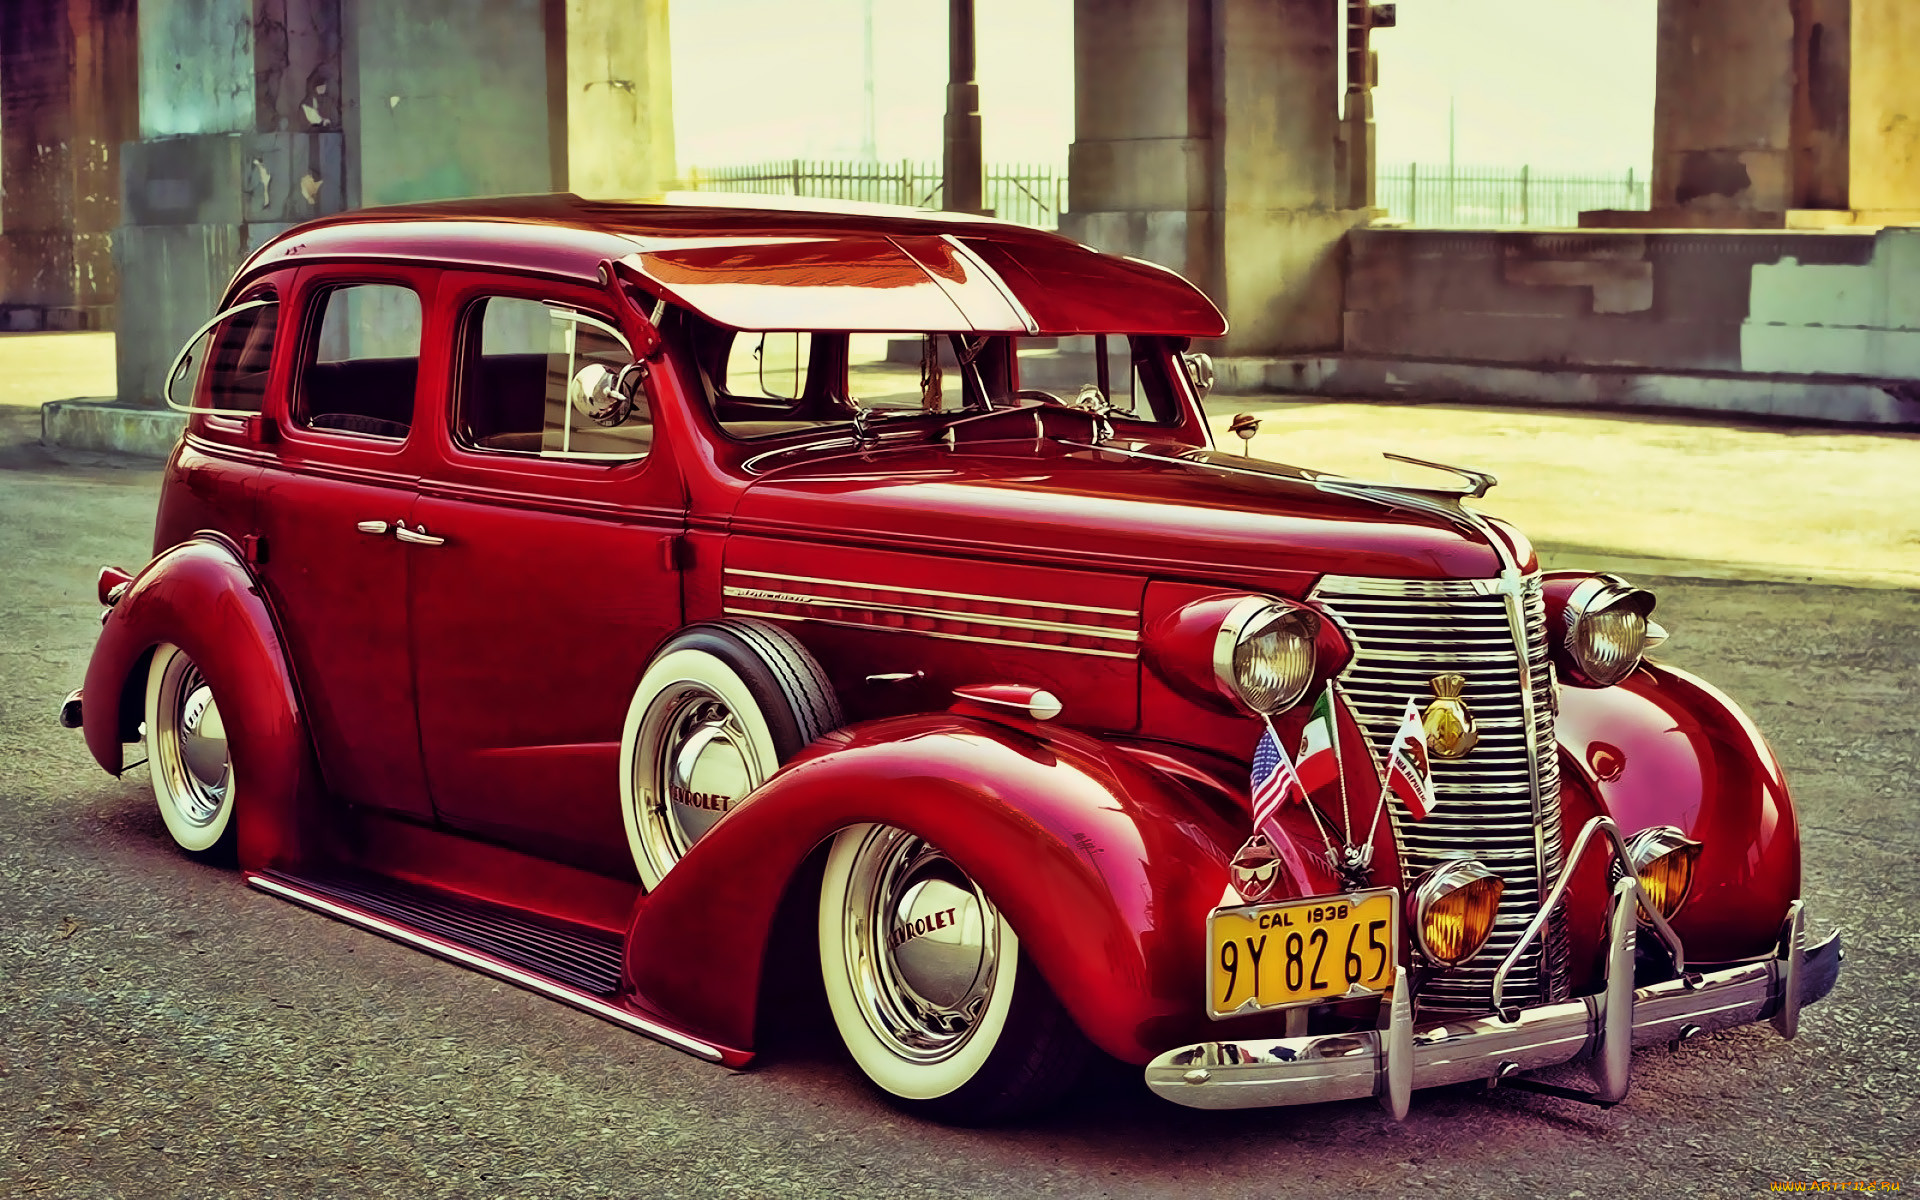 1938 chevy master deluxe, , custom classic car, , , 1938, , hevrolet, master, deluxe, , , hdr